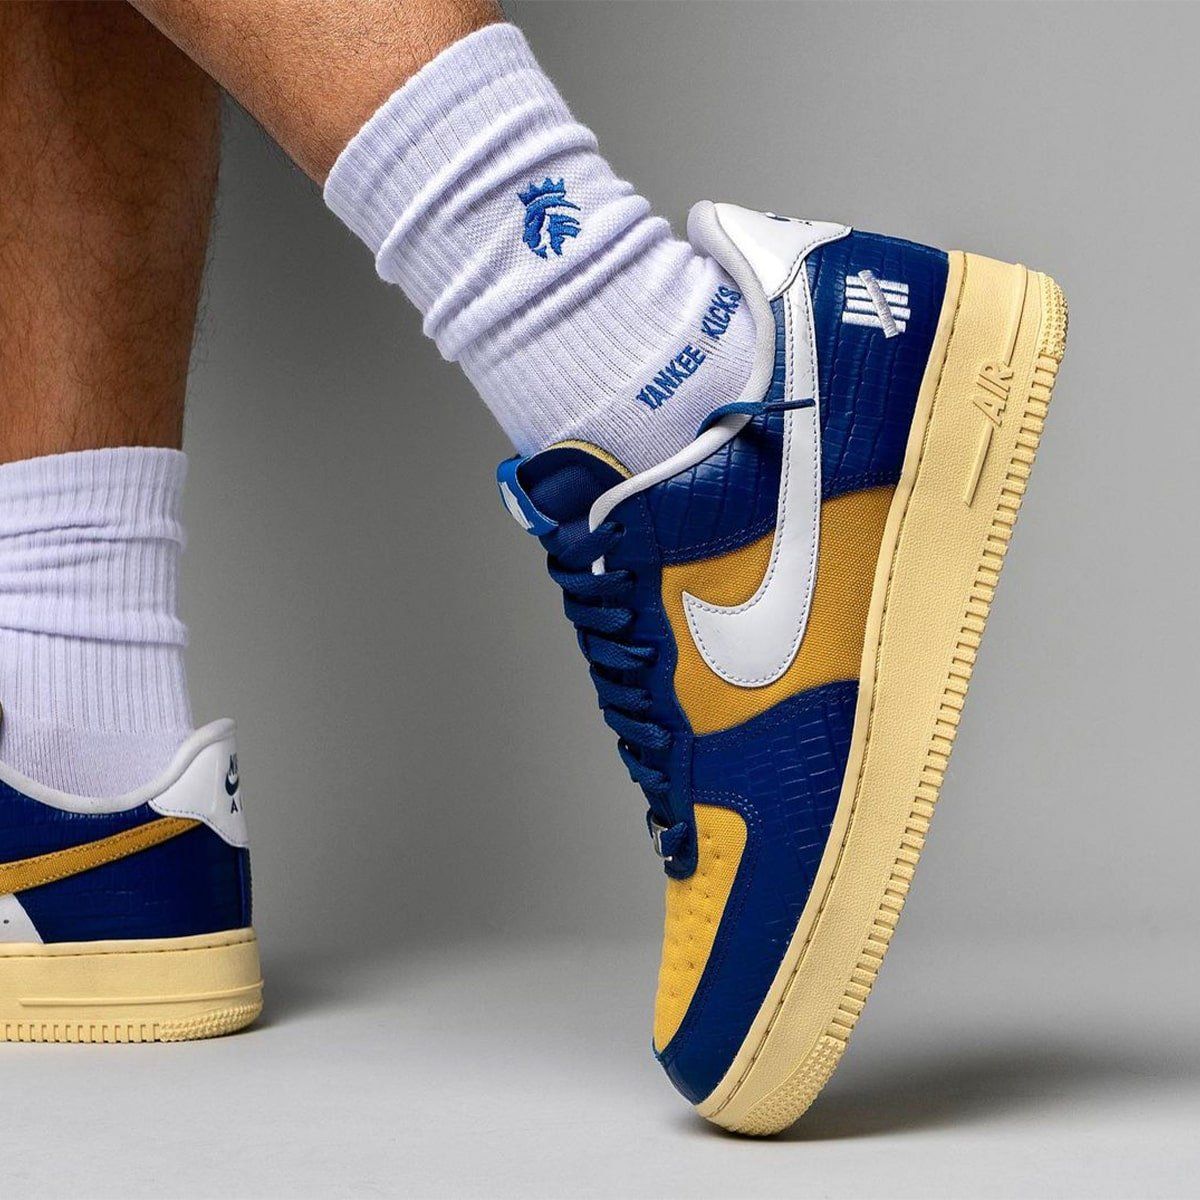 undefeated air force 1 blue croc